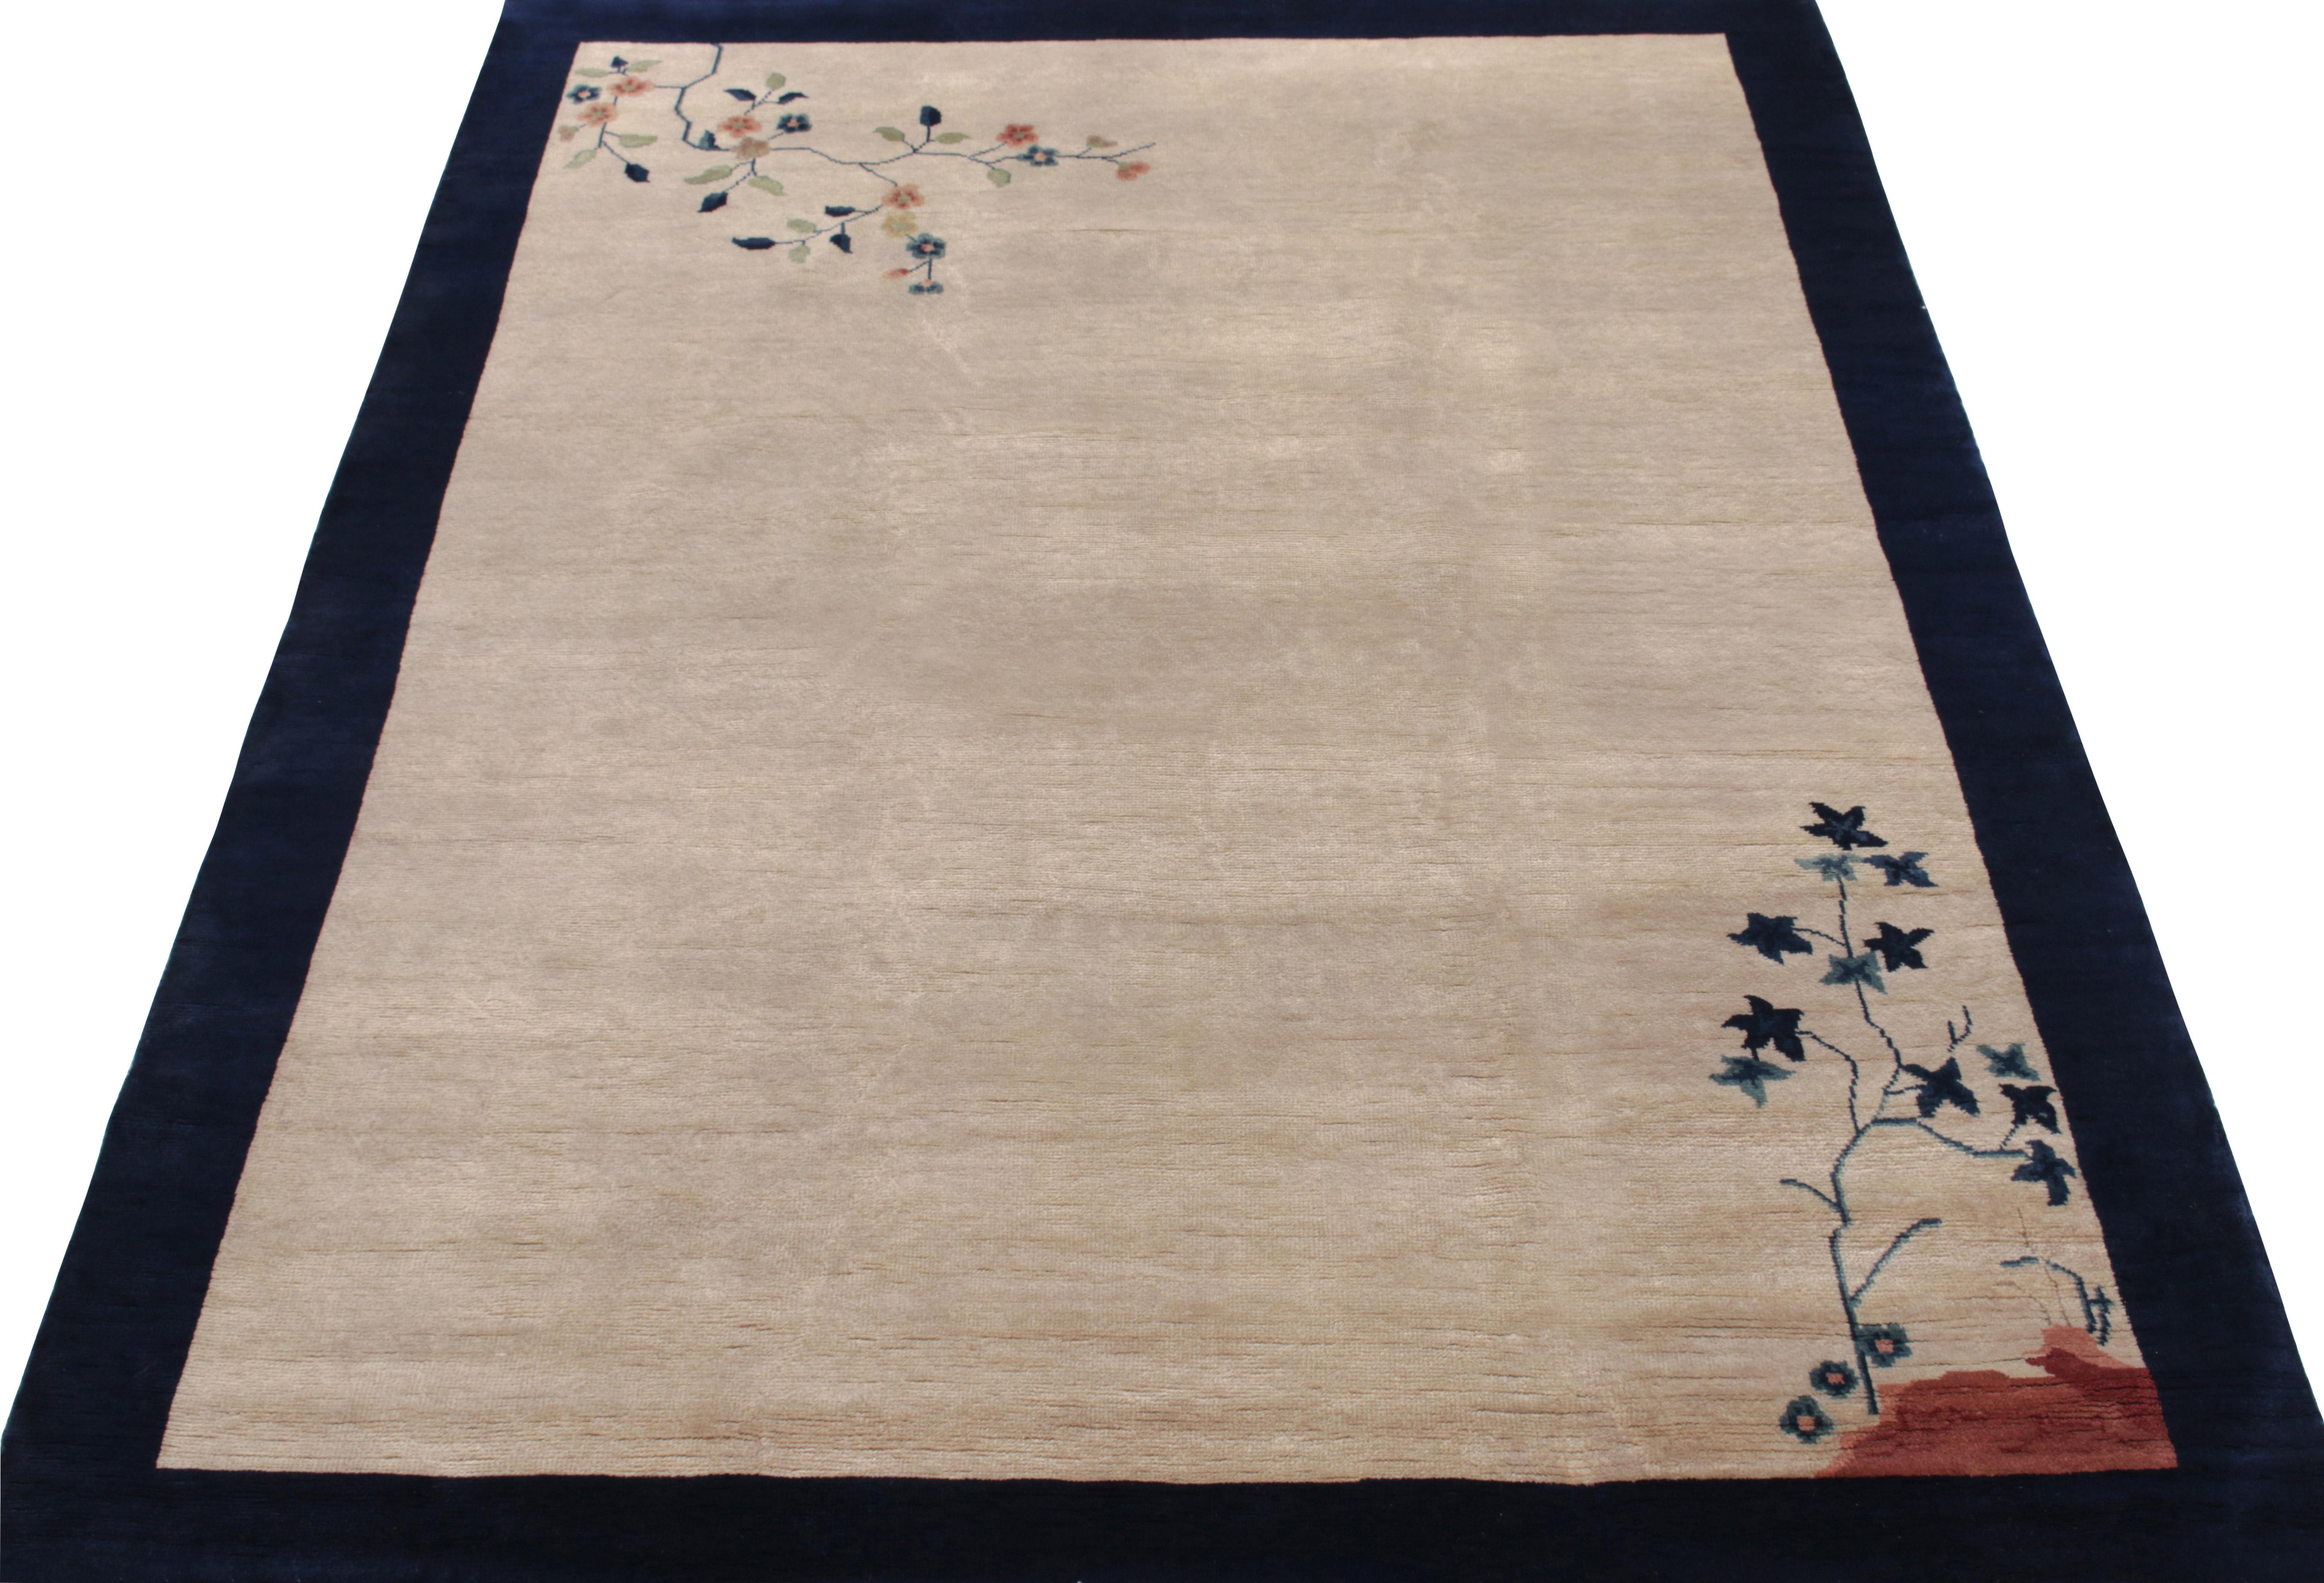 Signalling the beauty in minimalist Oriental style, this vintage 6x7 ode to Chinese art deco rugs of the 1920s features tender flower-bearing branches stooping down alluding to floral imagery on the ground. A gentle representation of garden themes